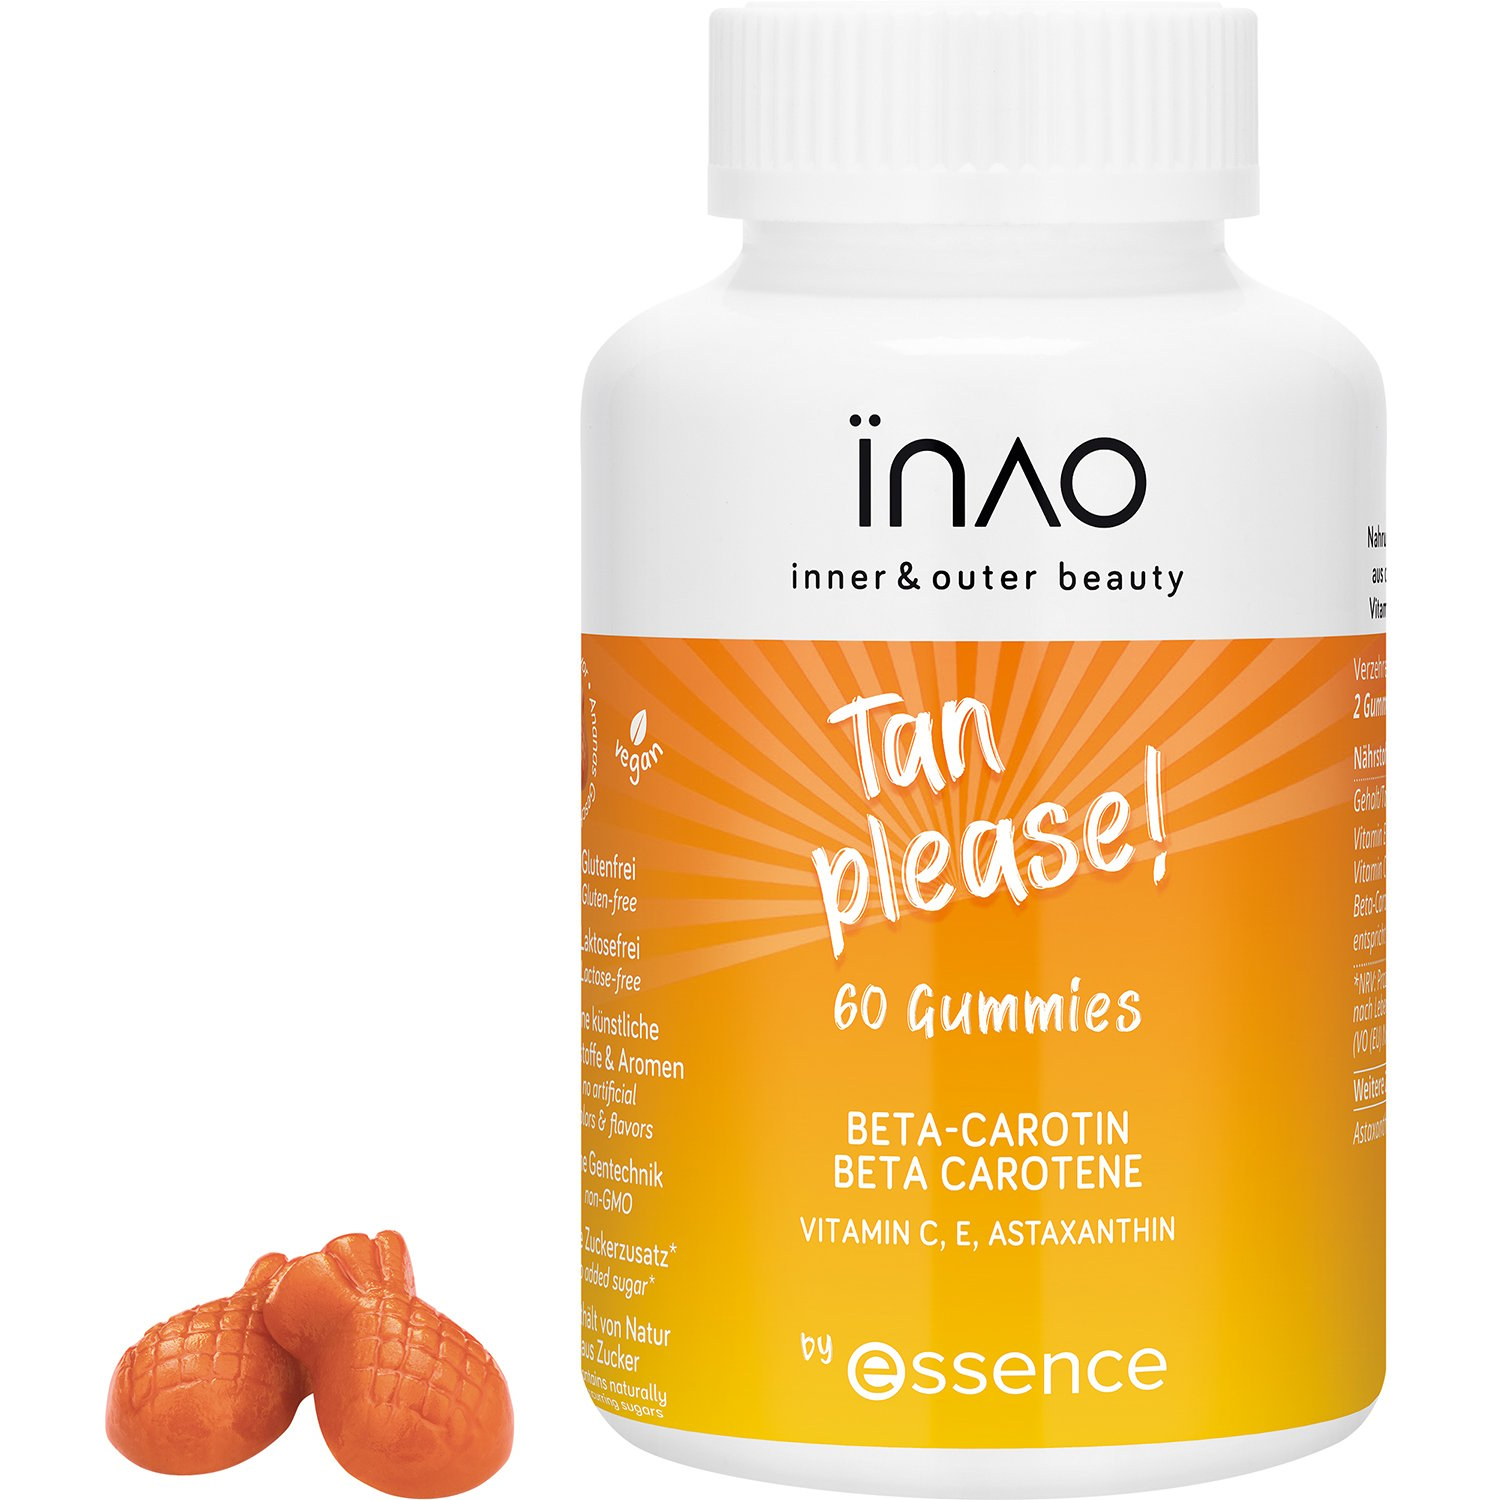 INAO Inner & Outer Beauty by essence Tan Please! 60 tuggtabletter